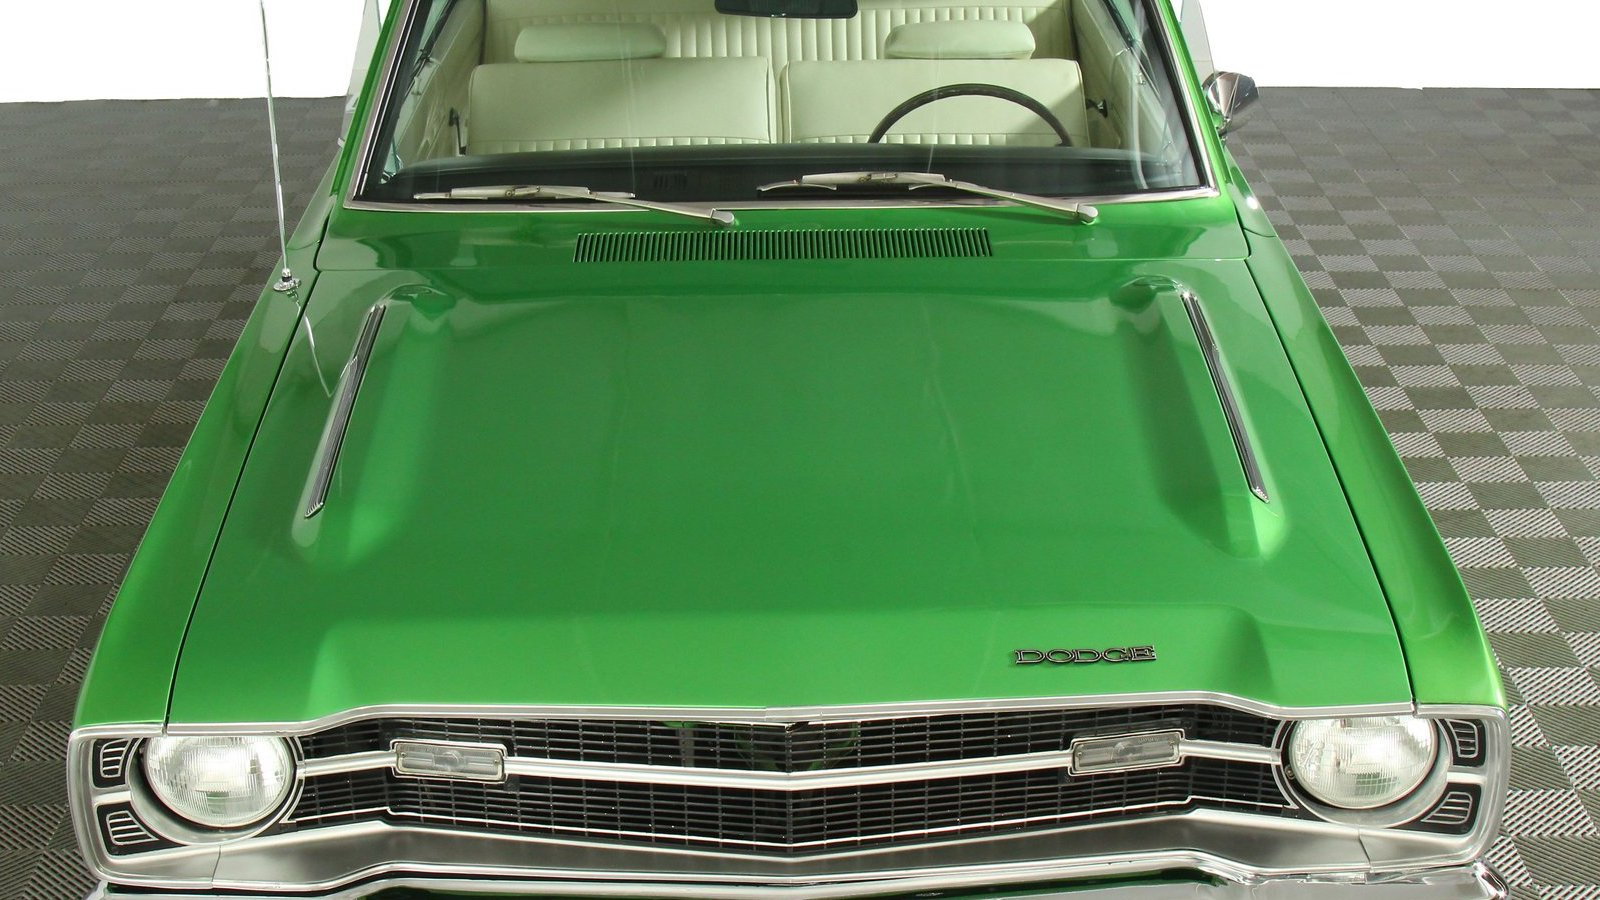 Mean Green 1969 Dart Makes Other Drivers Envious Dodgeforum picture photo